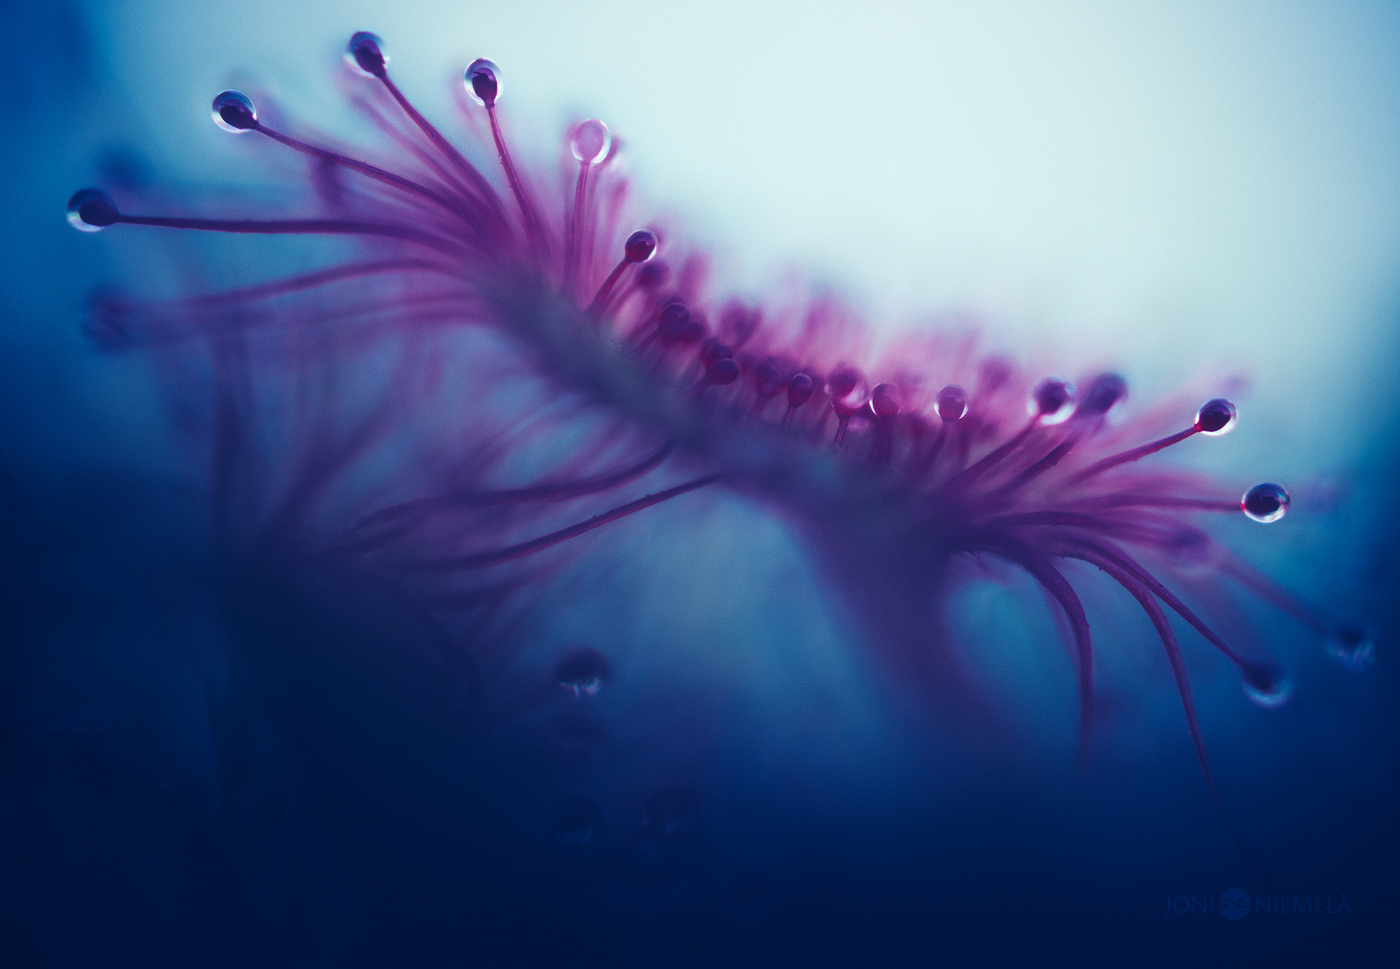 A close up of a Sundew Plant | Photo Title: Otherworldly Blues | Photo by Joni Niemelä ©2020